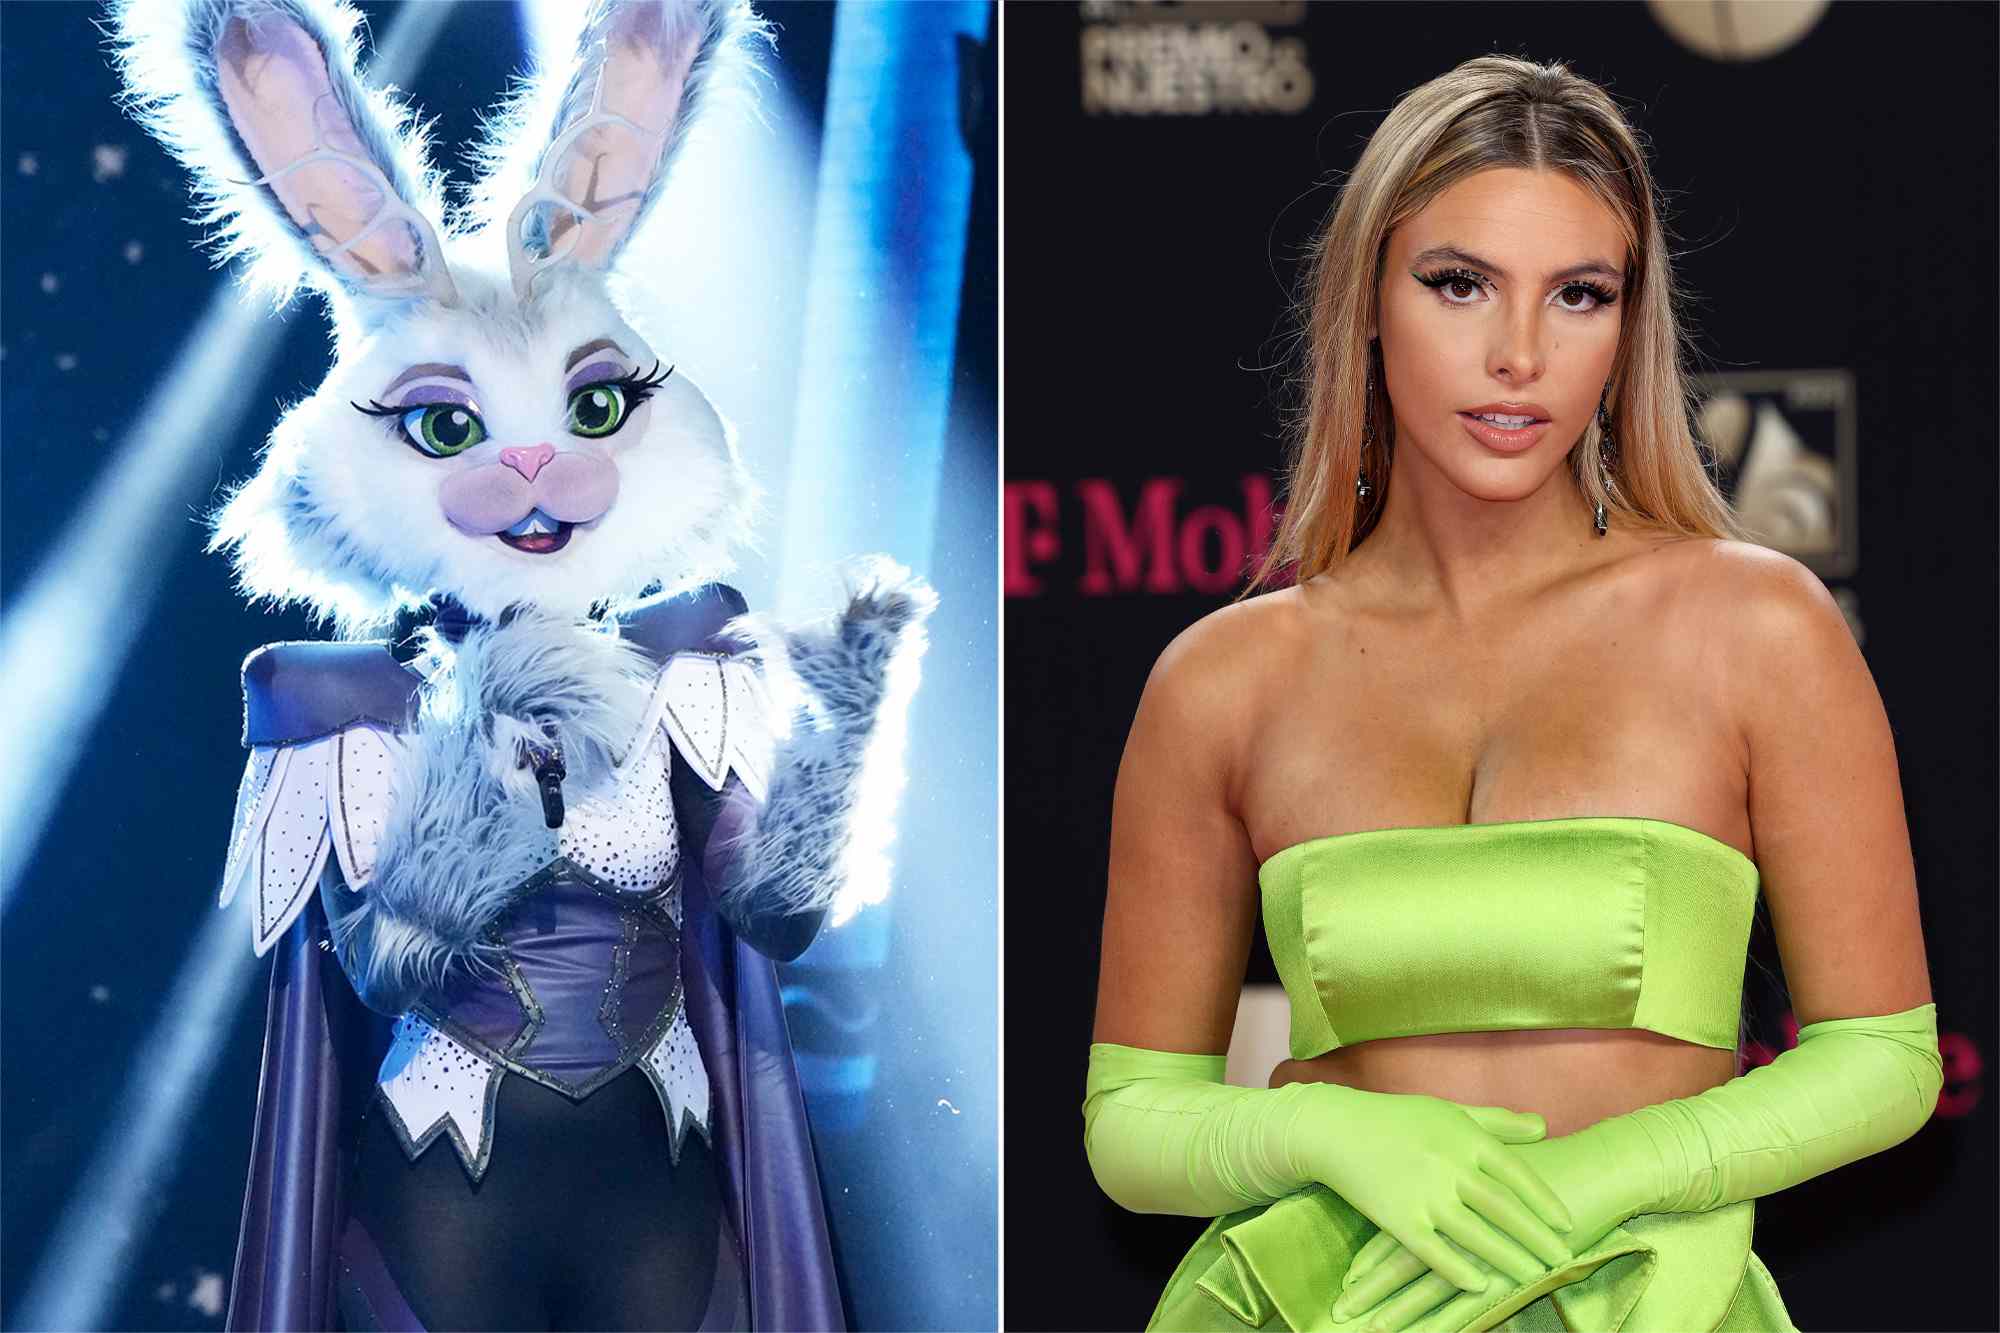 THE MASKED SINGER: Jackalope with characters from Sesame Street in the “Sesame Street Night” episode of THE MASKED SINGER airing Wednesday, March 15, Lele Pons attends Univision's 34th Edition Of Premio Lo Nuestro a la Música Latina at FTX Arena on February 24, 2022 in Miami, Florida